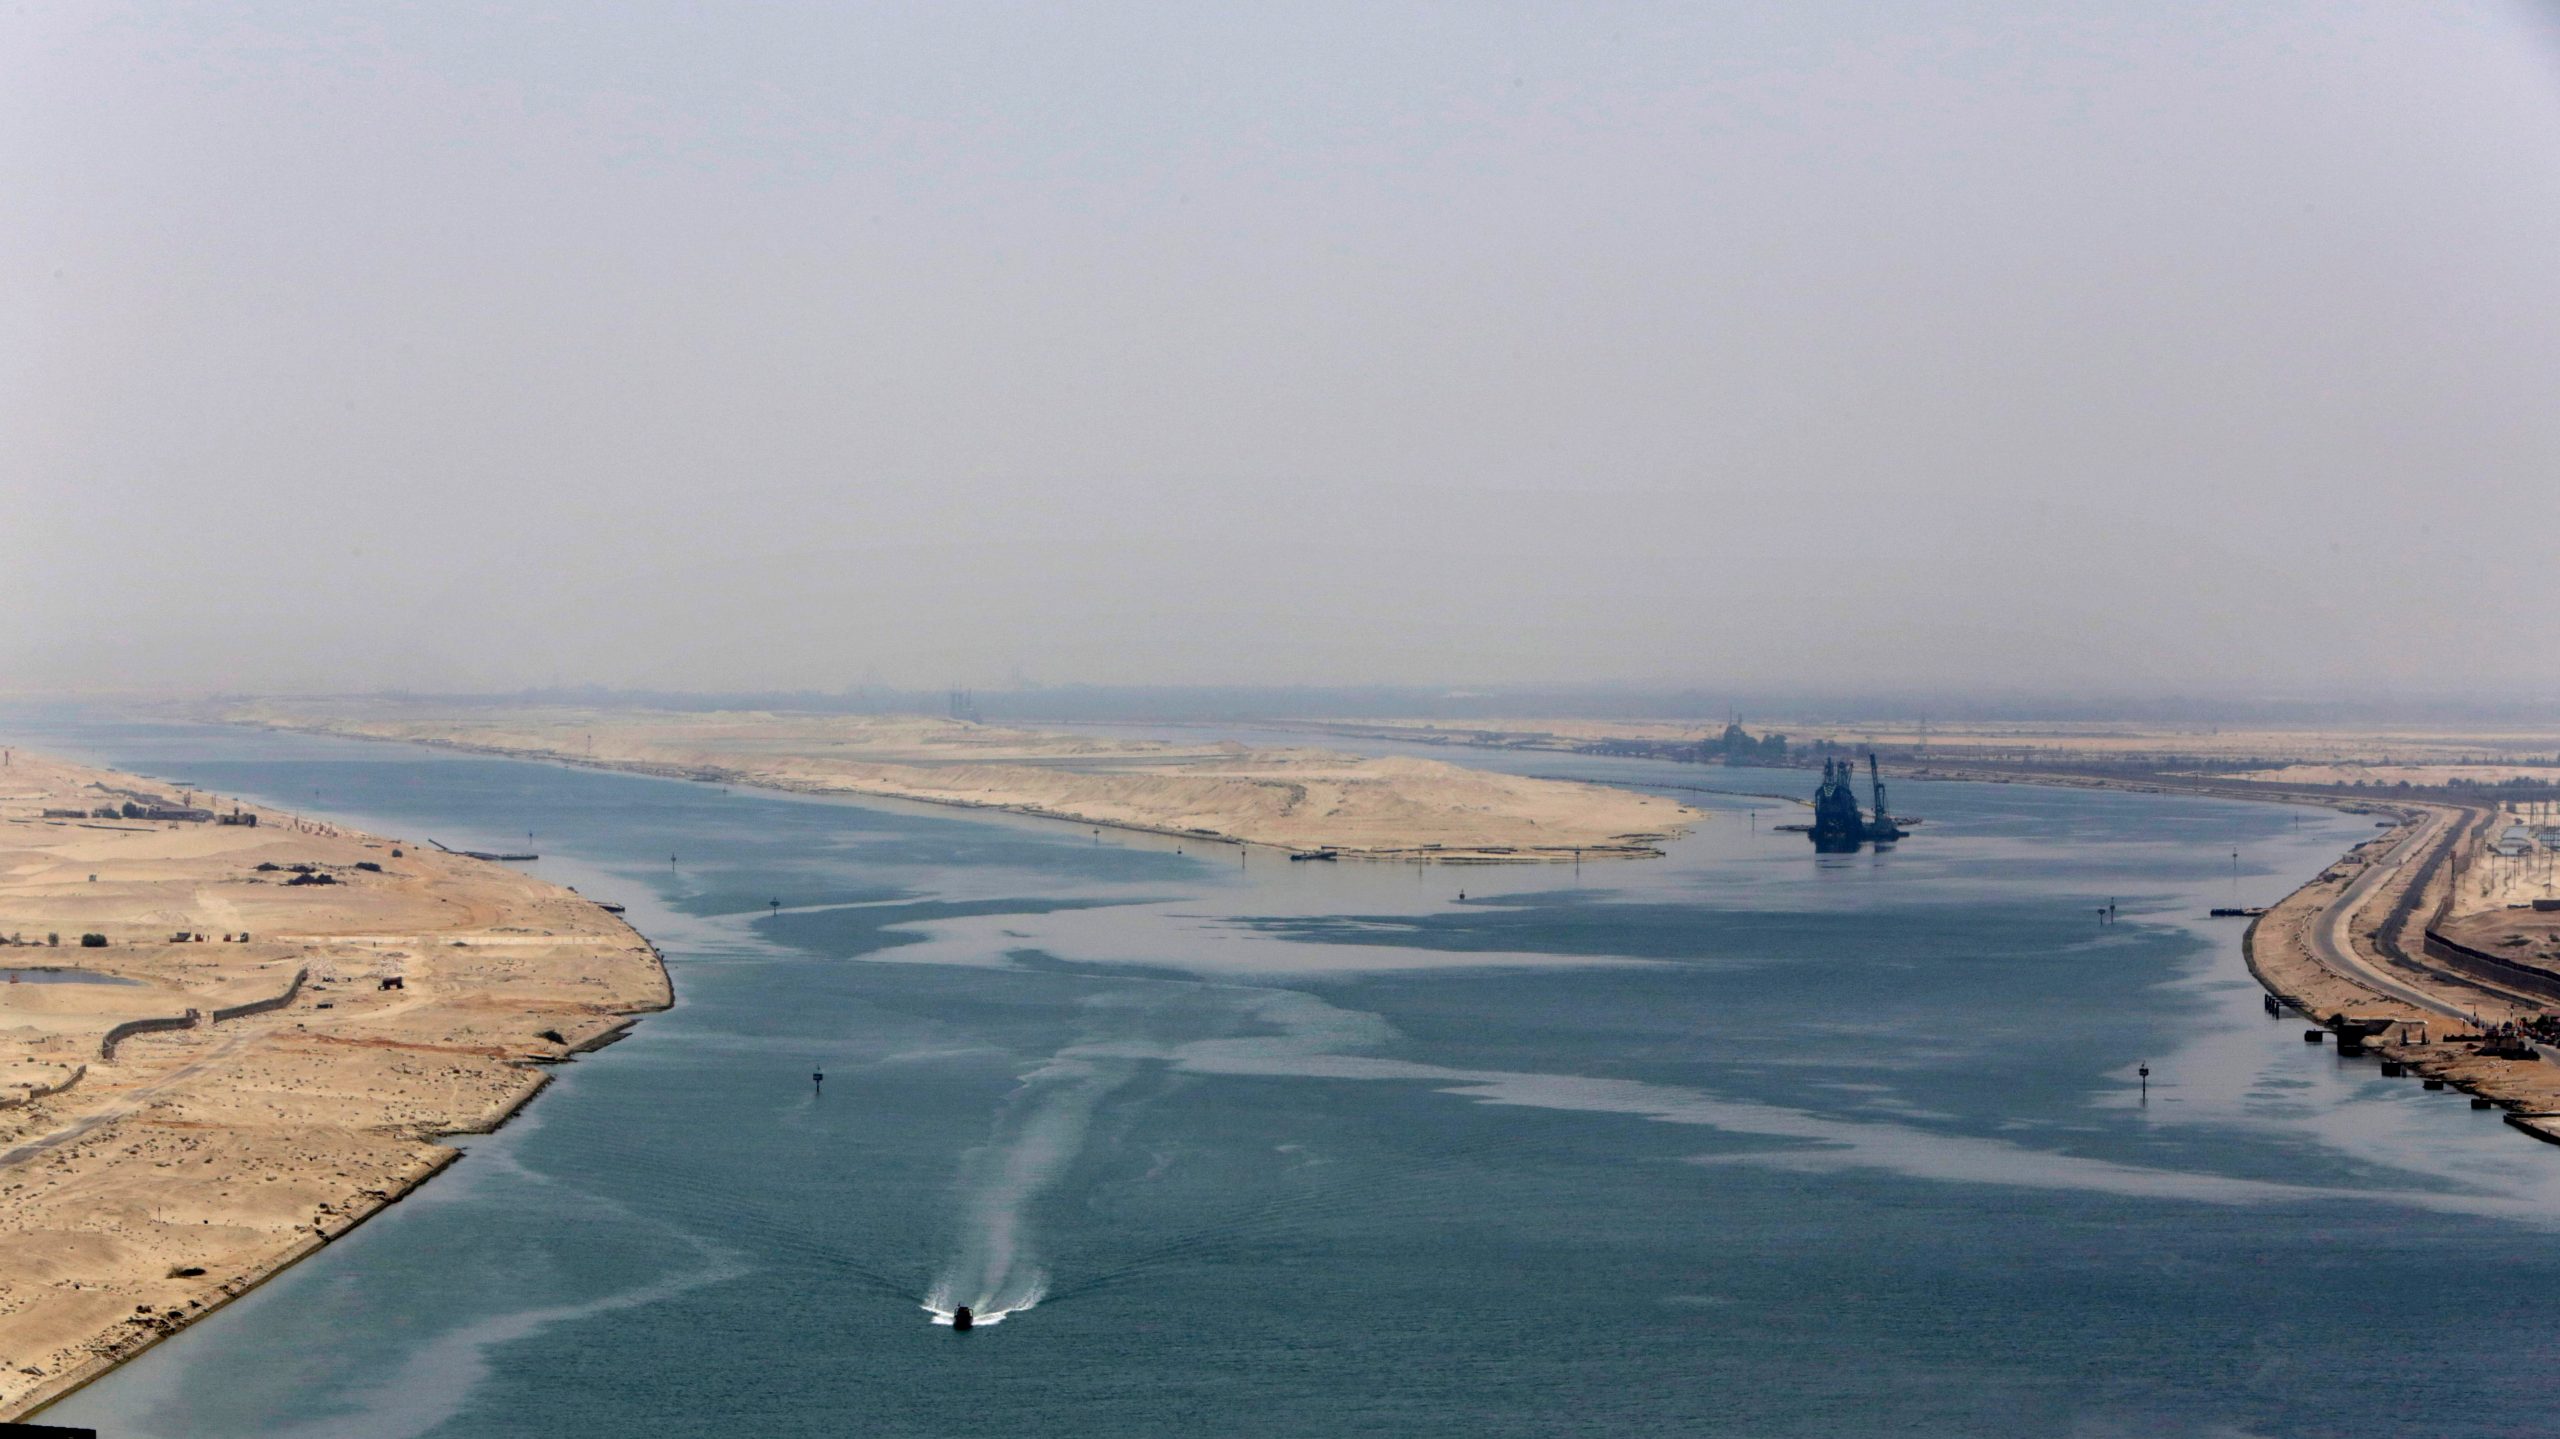 Egypt forced to hike ships’ transit fees for Suez Canal amid cash crunch